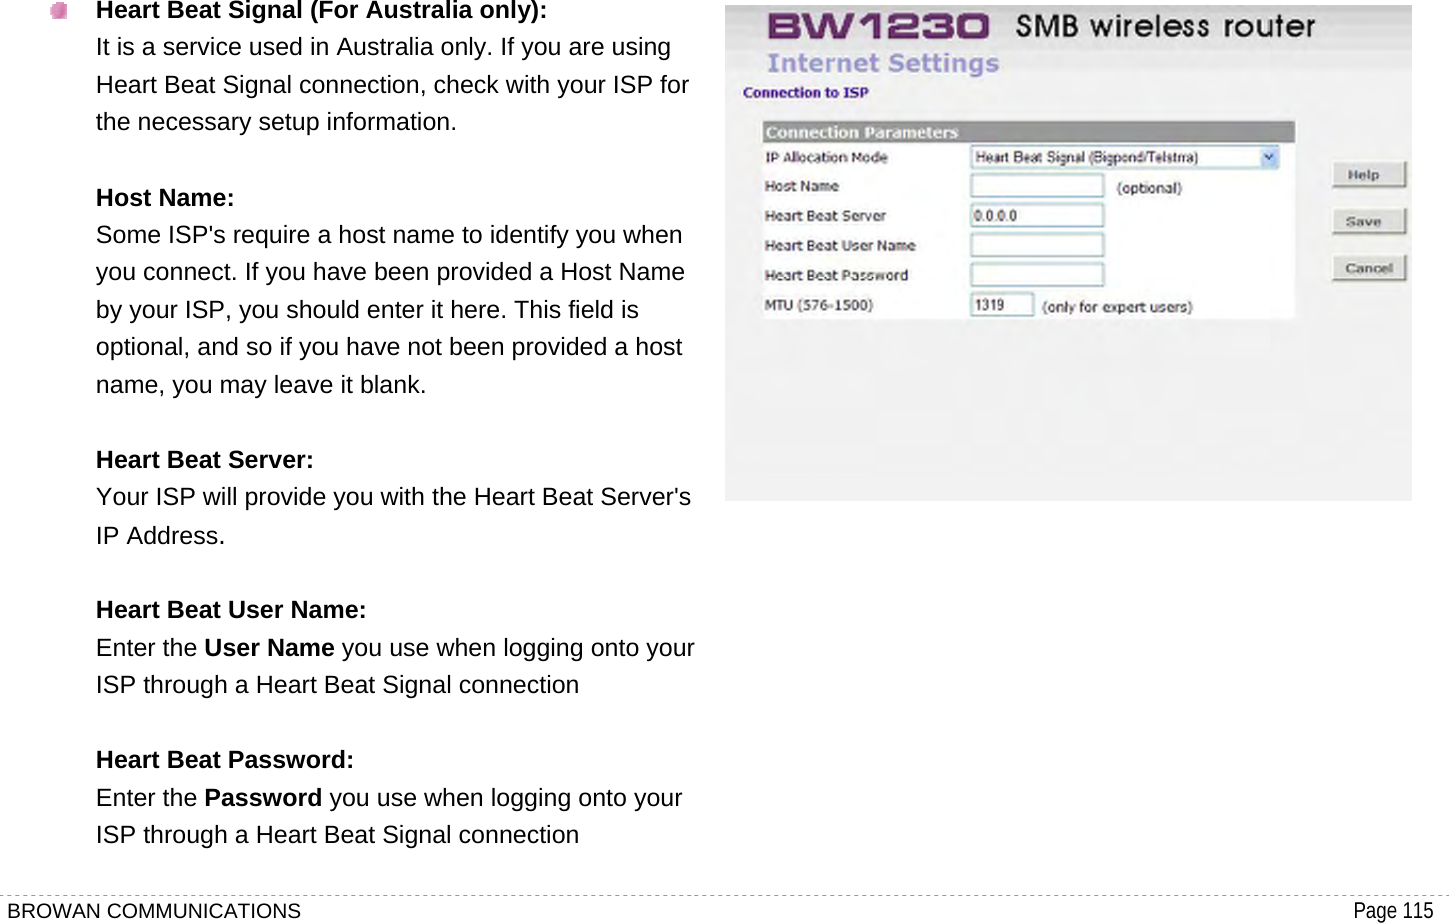 BROWAN COMMUNICATIONS                                                                                           Page 115   Heart Beat Signal (For Australia only): It is a service used in Australia only. If you are using Heart Beat Signal connection, check with your ISP for the necessary setup information.  Host Name: Some ISP&apos;s require a host name to identify you when you connect. If you have been provided a Host Name by your ISP, you should enter it here. This field is optional, and so if you have not been provided a host name, you may leave it blank.  Heart Beat Server: Your ISP will provide you with the Heart Beat Server&apos;s IP Address.  Heart Beat User Name: Enter the User Name you use when logging onto your ISP through a Heart Beat Signal connection  Heart Beat Password: Enter the Password you use when logging onto your ISP through a Heart Beat Signal connection           